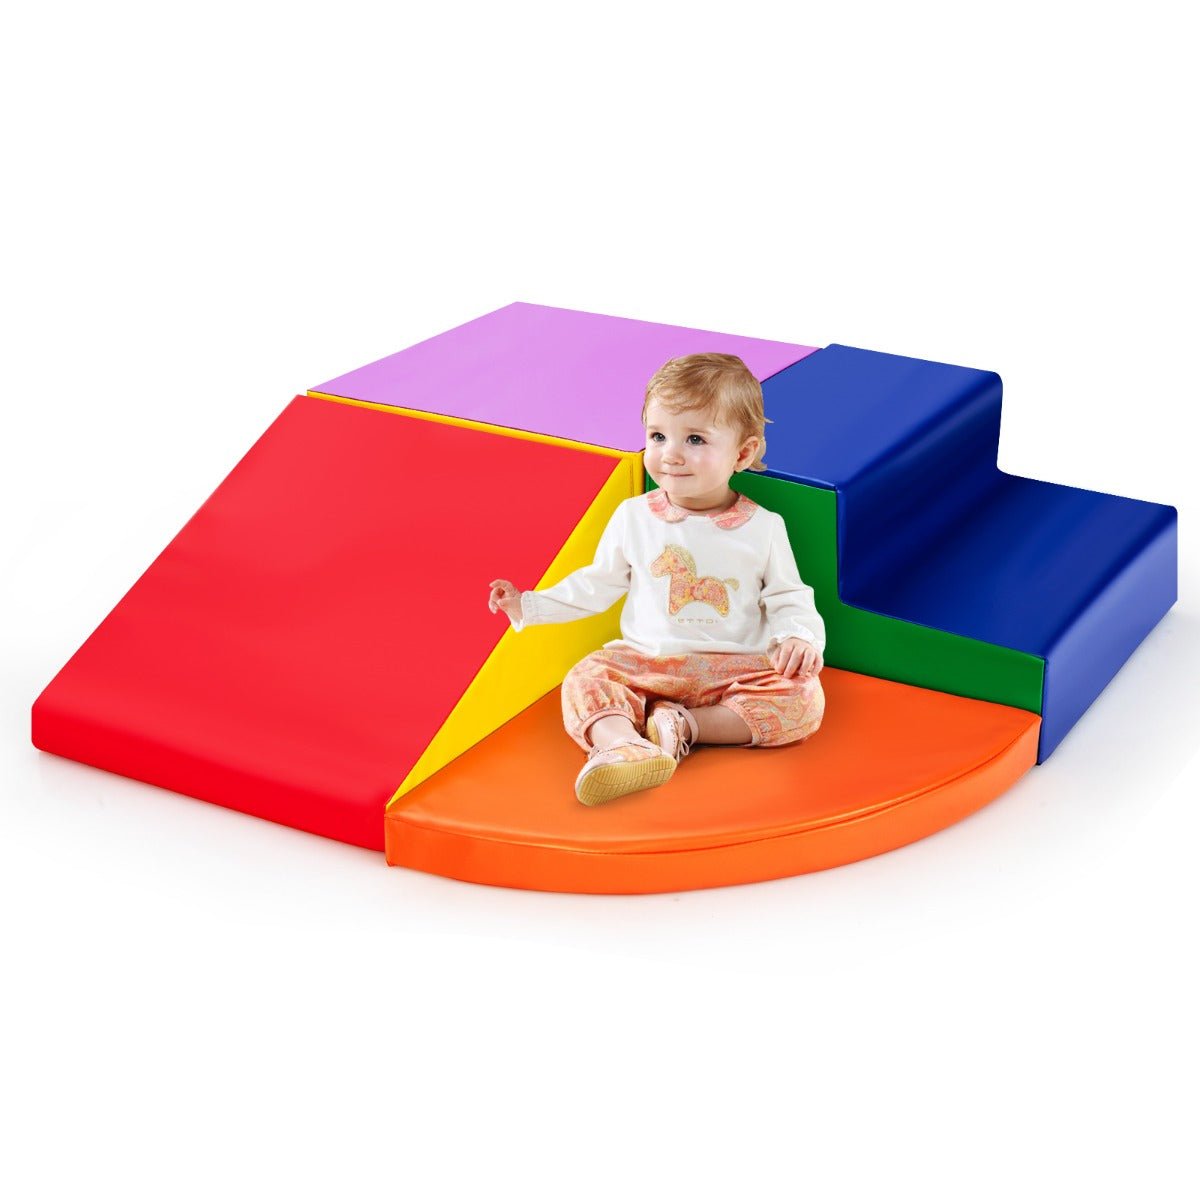 Creative Play with Building Block Set